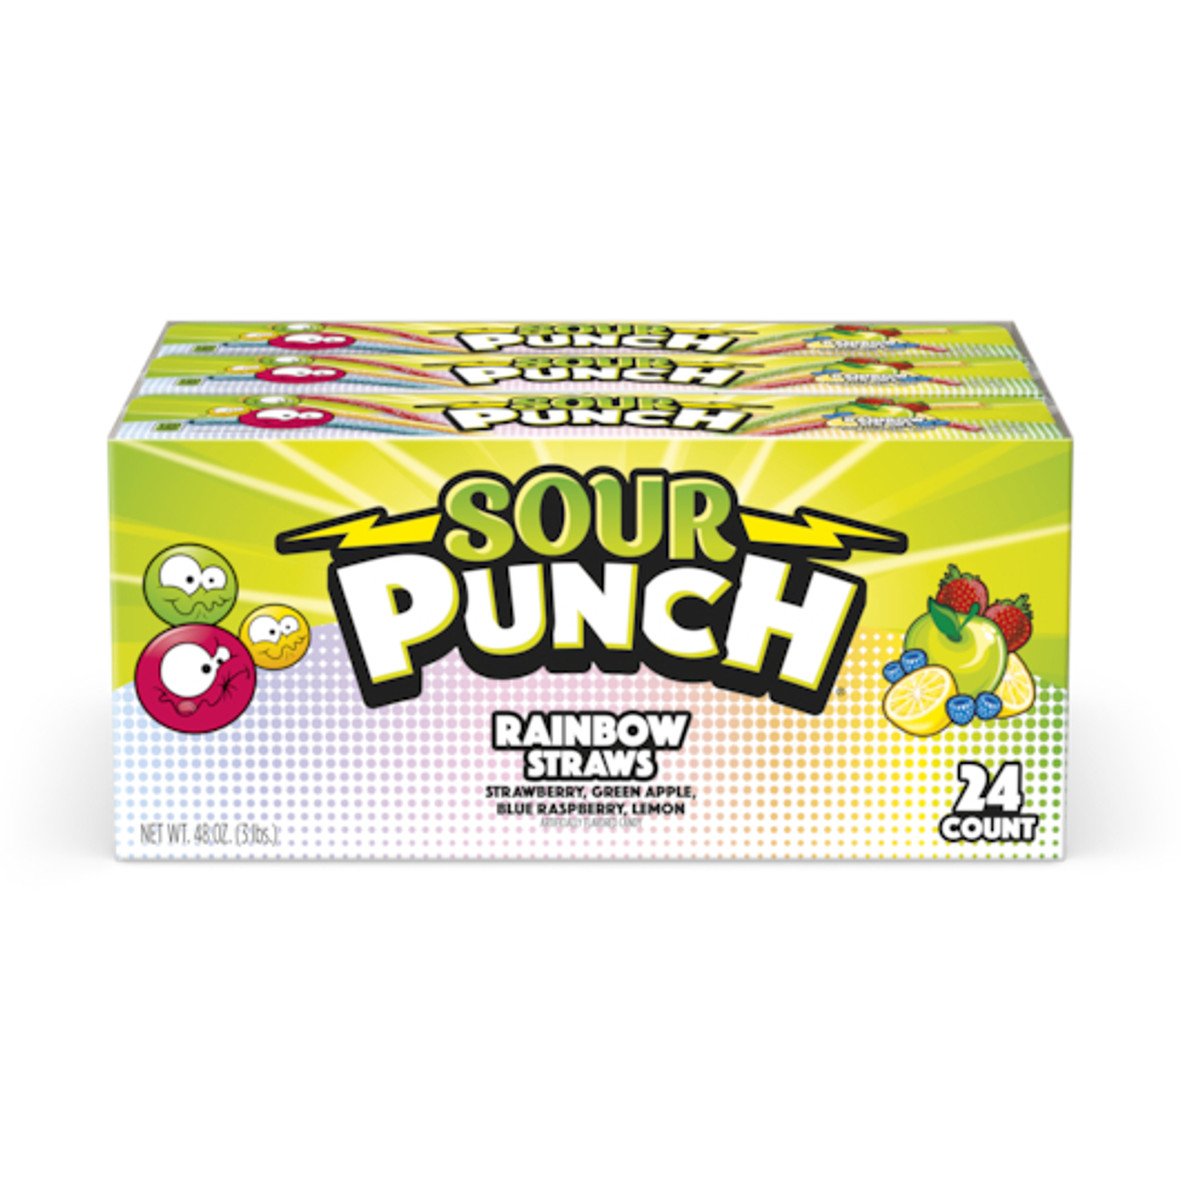 Sour Punch Rainbow Straws Candy, 2 Ounce, 288 Per Case